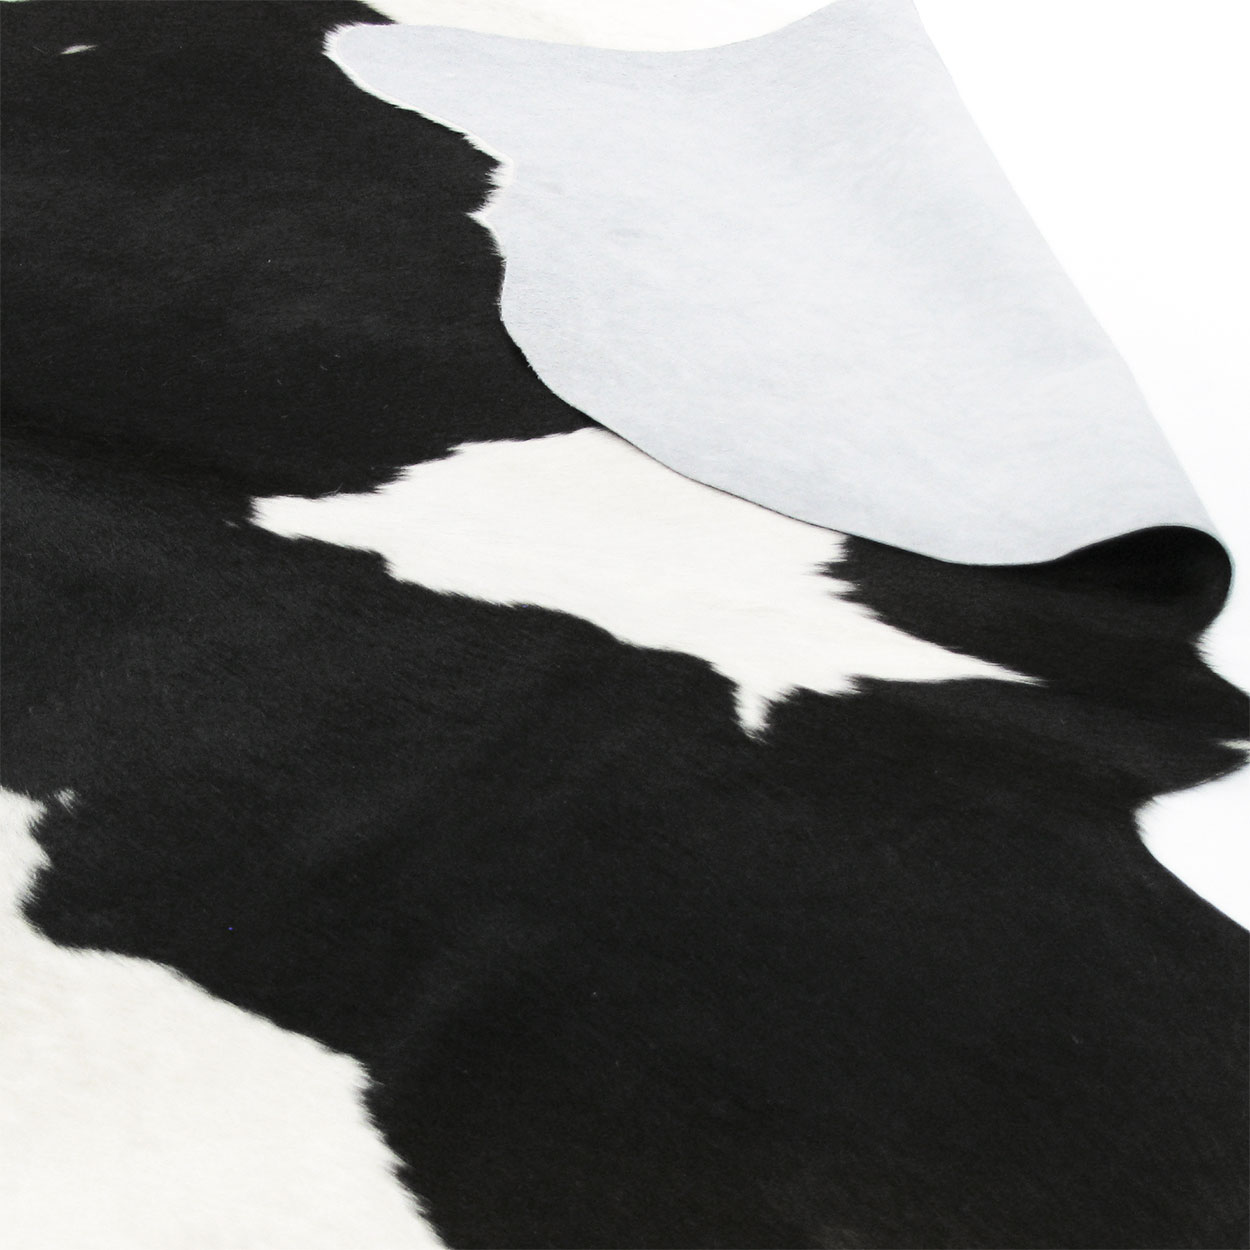 322102 - Value Line Grade B Natural Black and White Cowhide